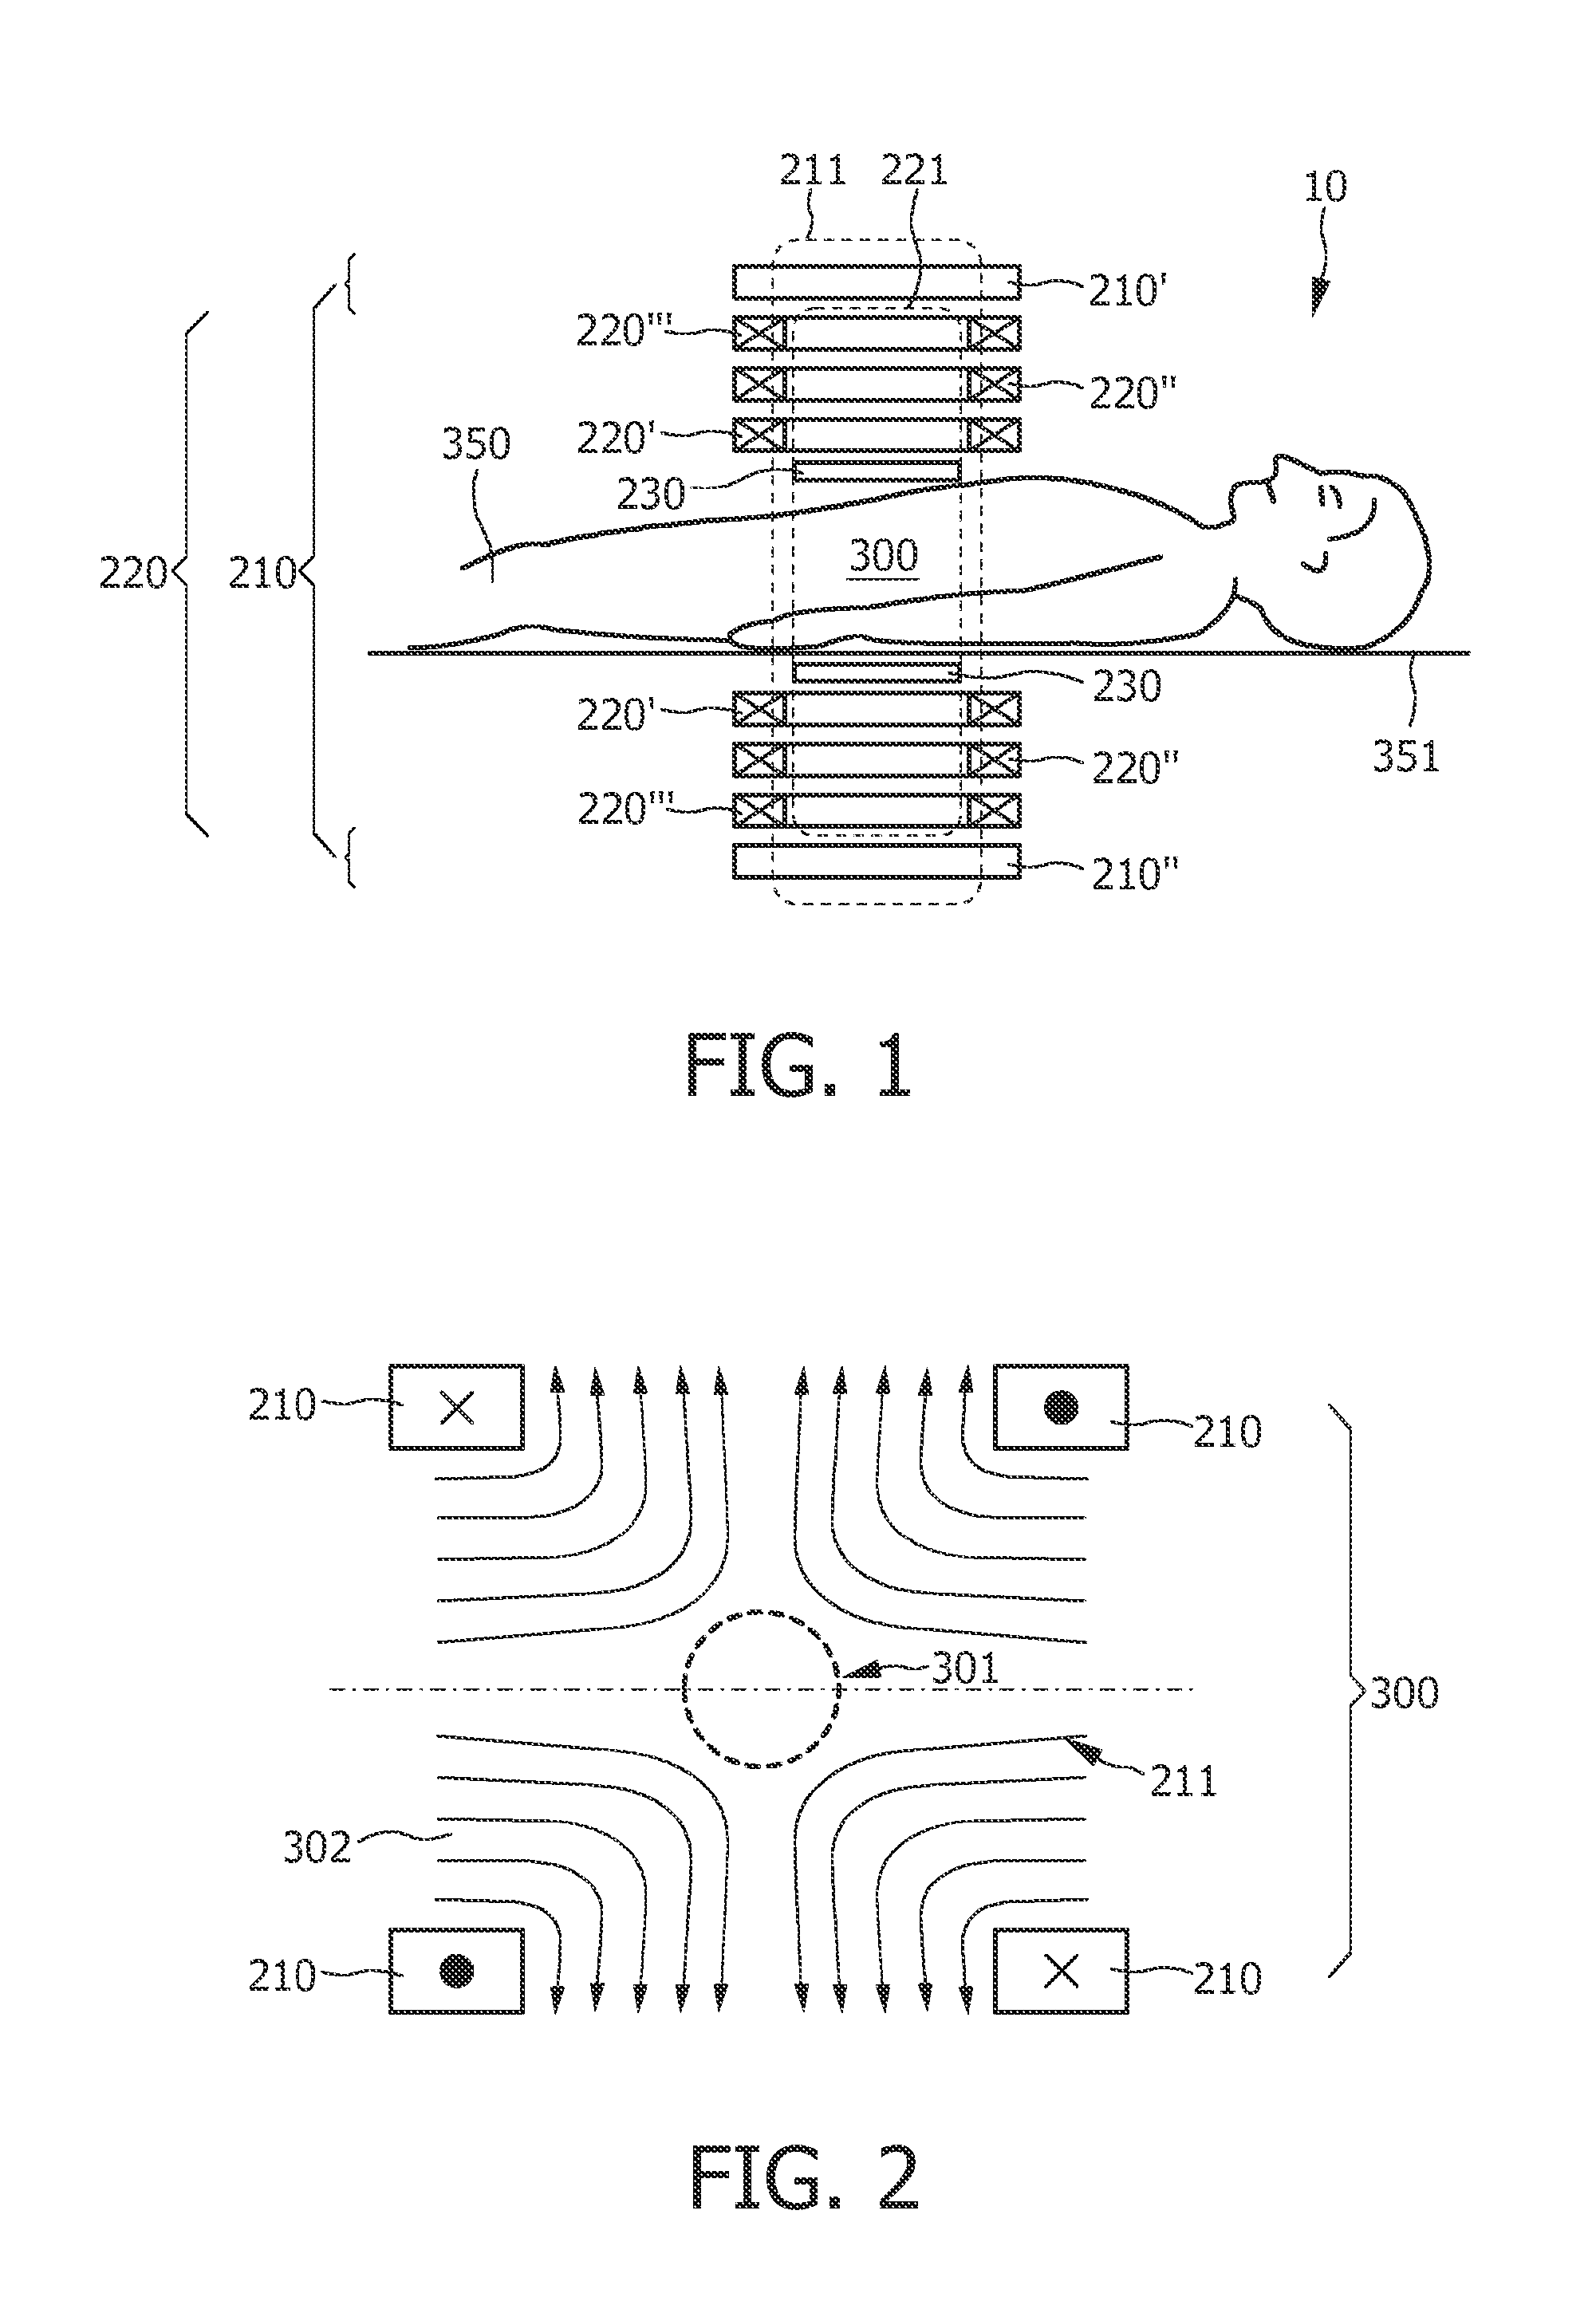 Arrangement for imaging an object including a vessel using magnetic particle imaging